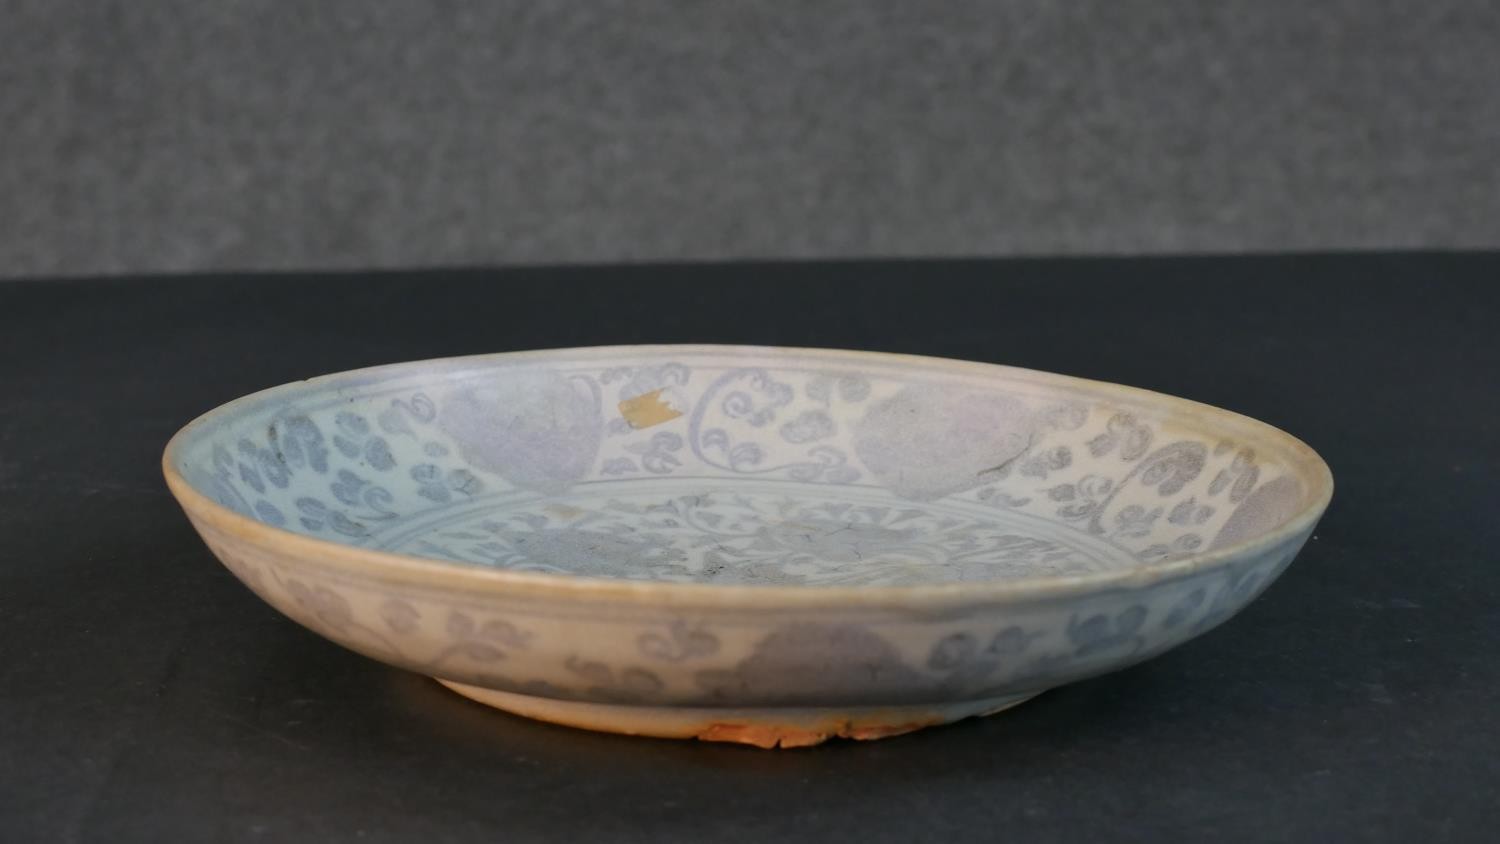 A 19th century Chinese blue and white stylised floral and foliate design bowl. H.6.5 Diam.21.5cm - Image 2 of 7